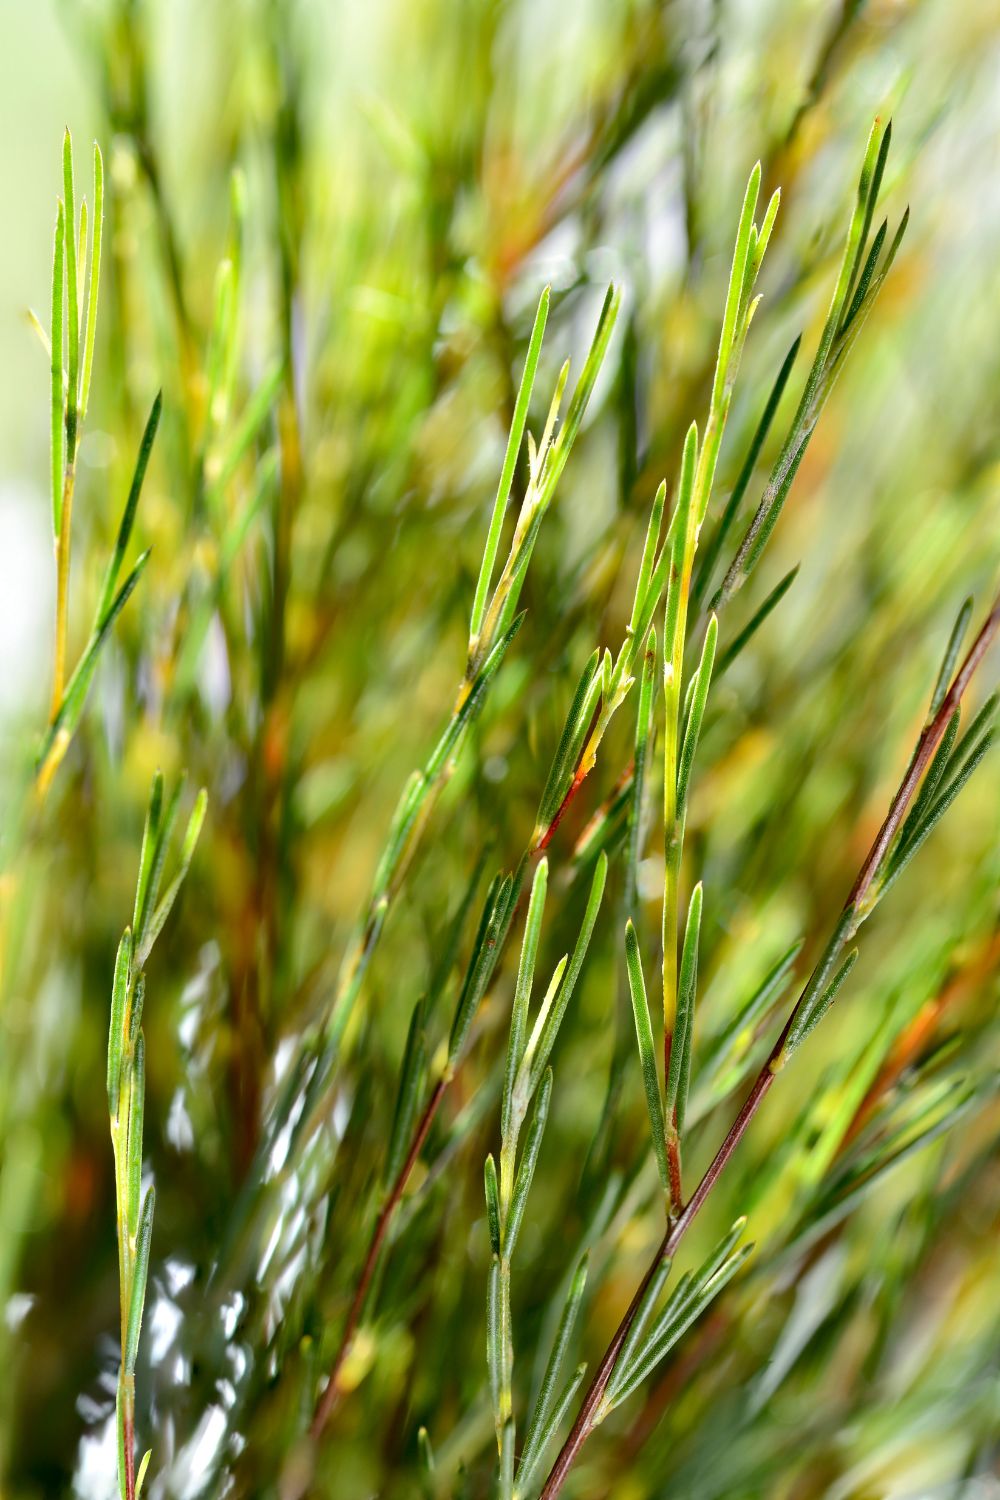 Rooibos plant